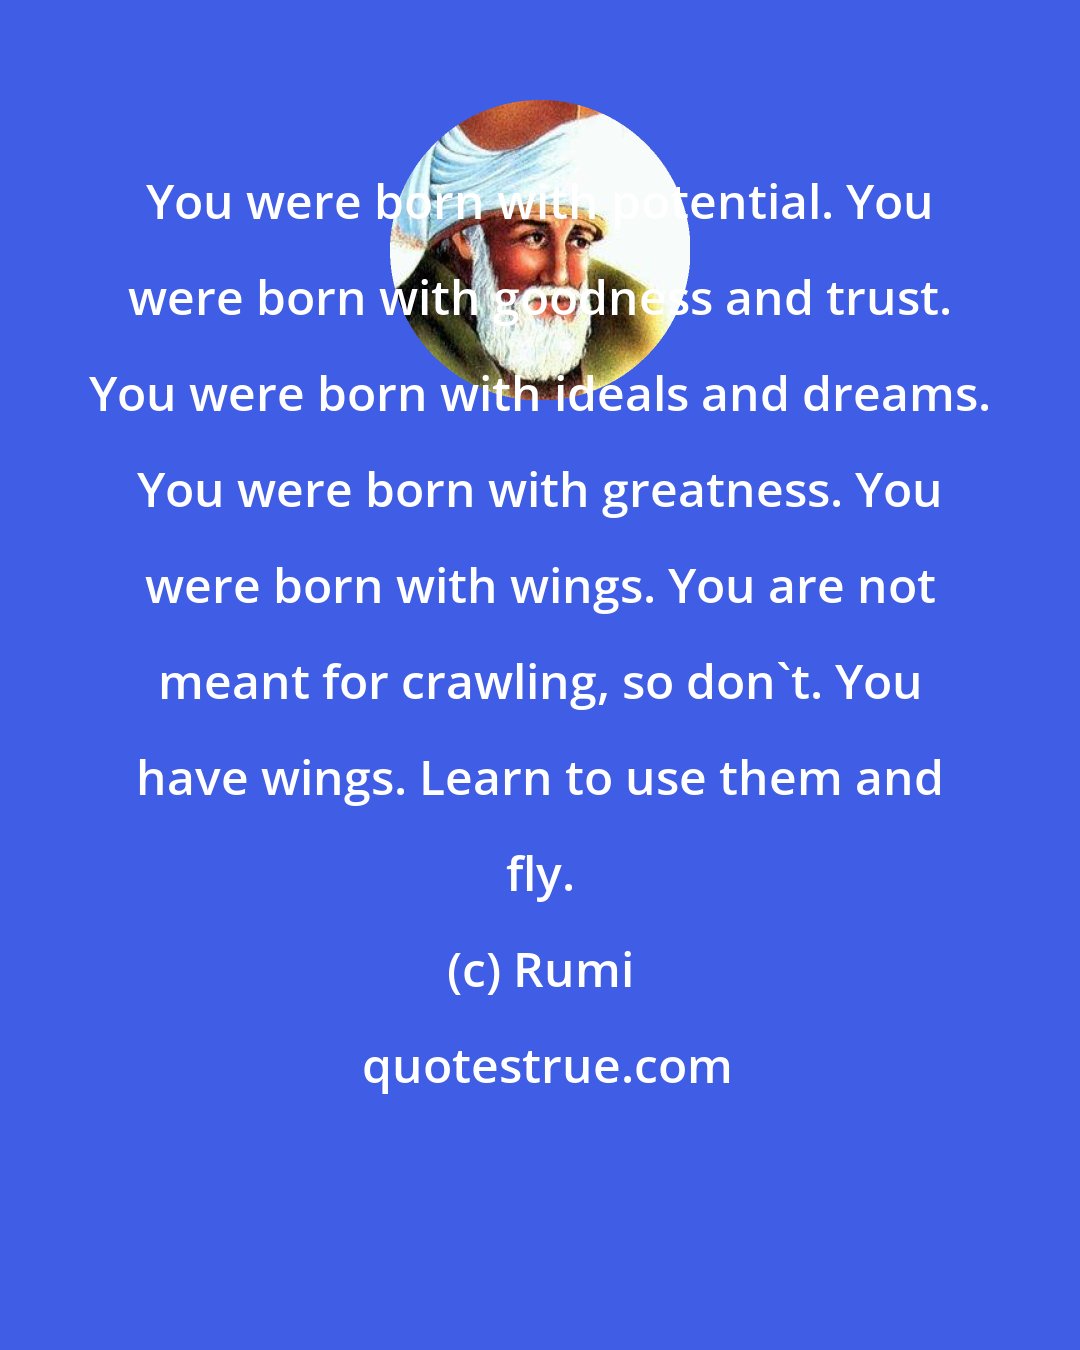 Rumi: You were born with potential. You were born with goodness and trust. You were born with ideals and dreams. You were born with greatness. You were born with wings. You are not meant for crawling, so don't. You have wings. Learn to use them and fly.